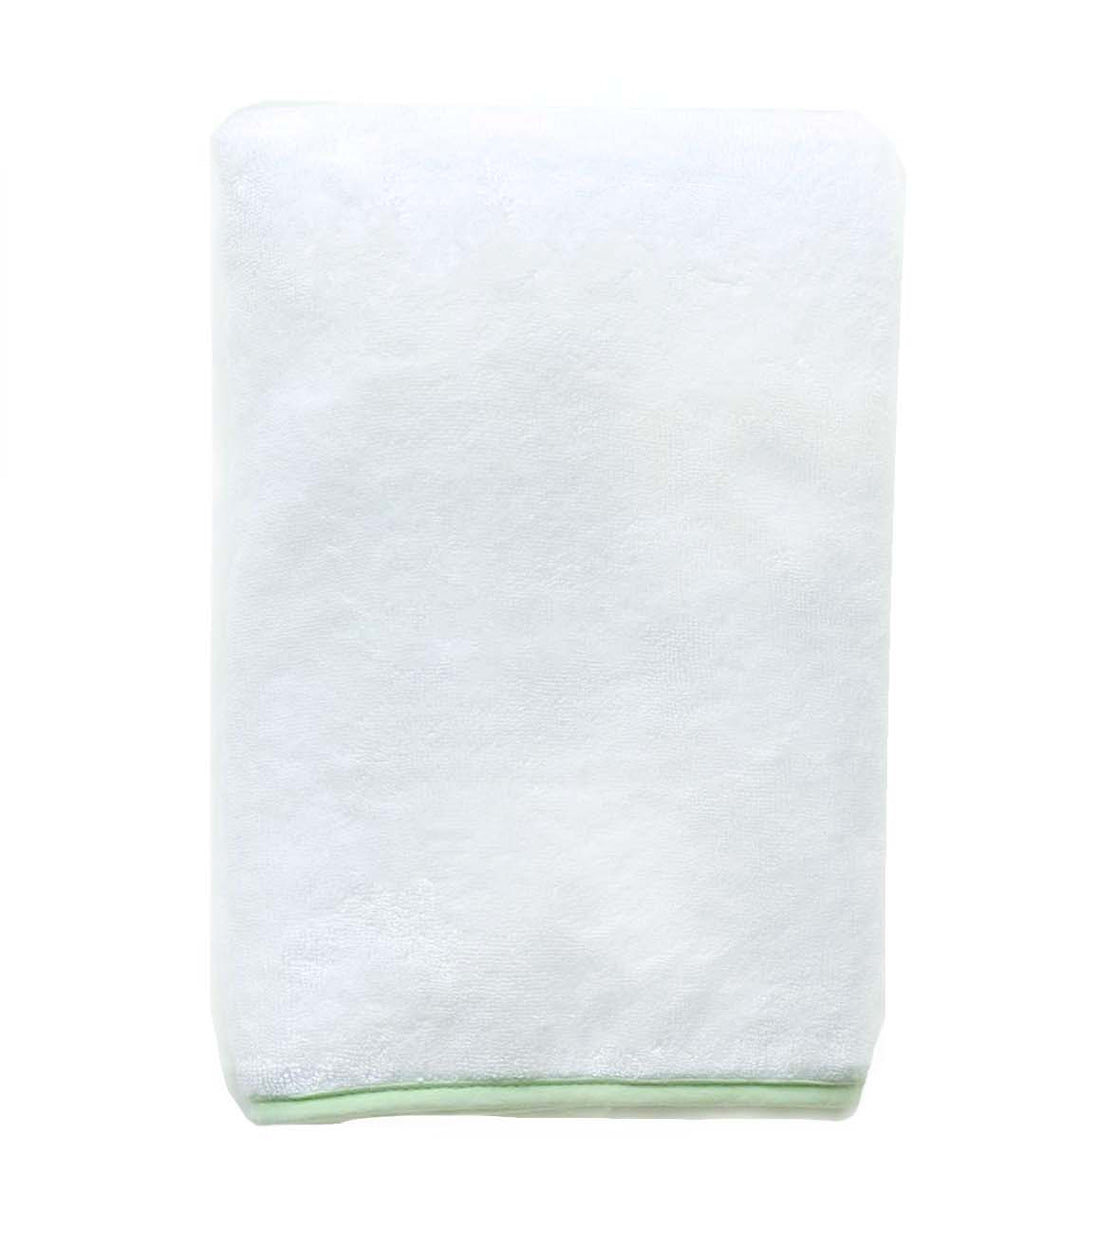 PIPED TERRY BATH TOWEL